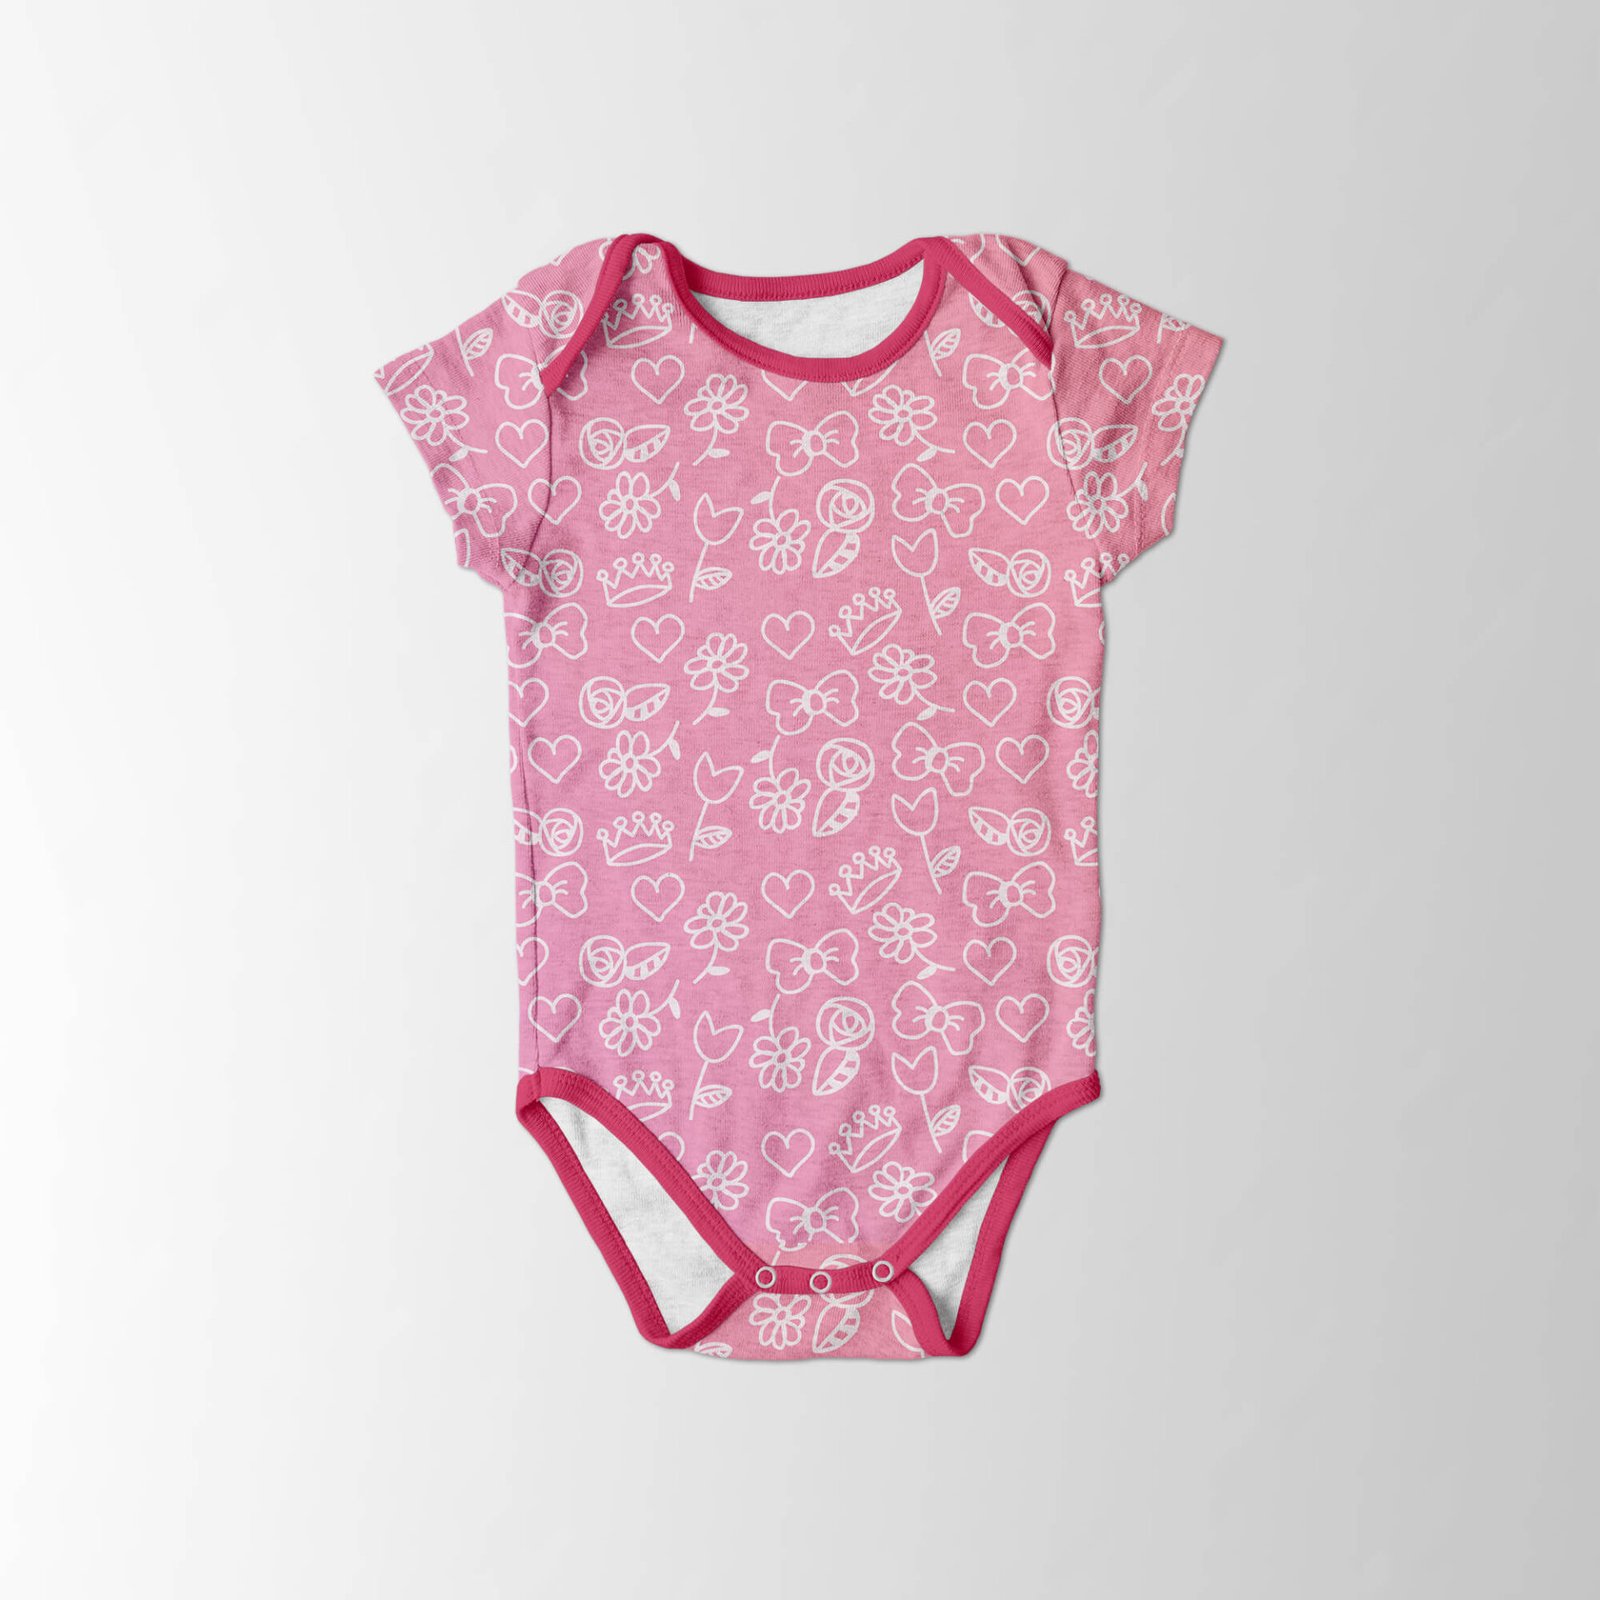 Download 20+ Cute Baby Clothes Mockup Onesie / Bodysuit PSD Template